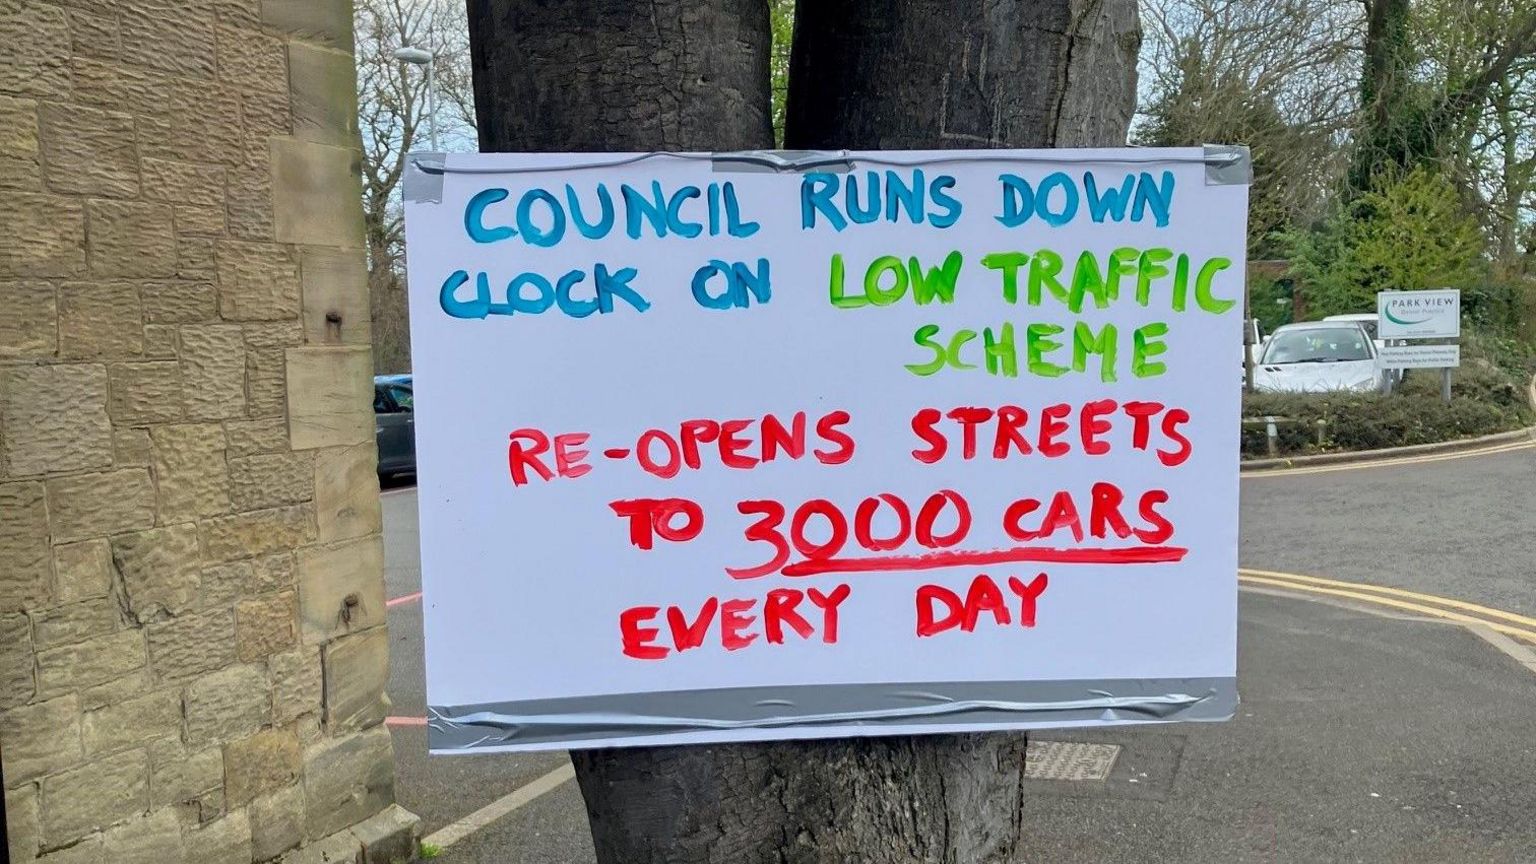 Placard on tree reading 'council runs down clock on low traffic scheme' and 're-opens streets to 3000 cars every day'